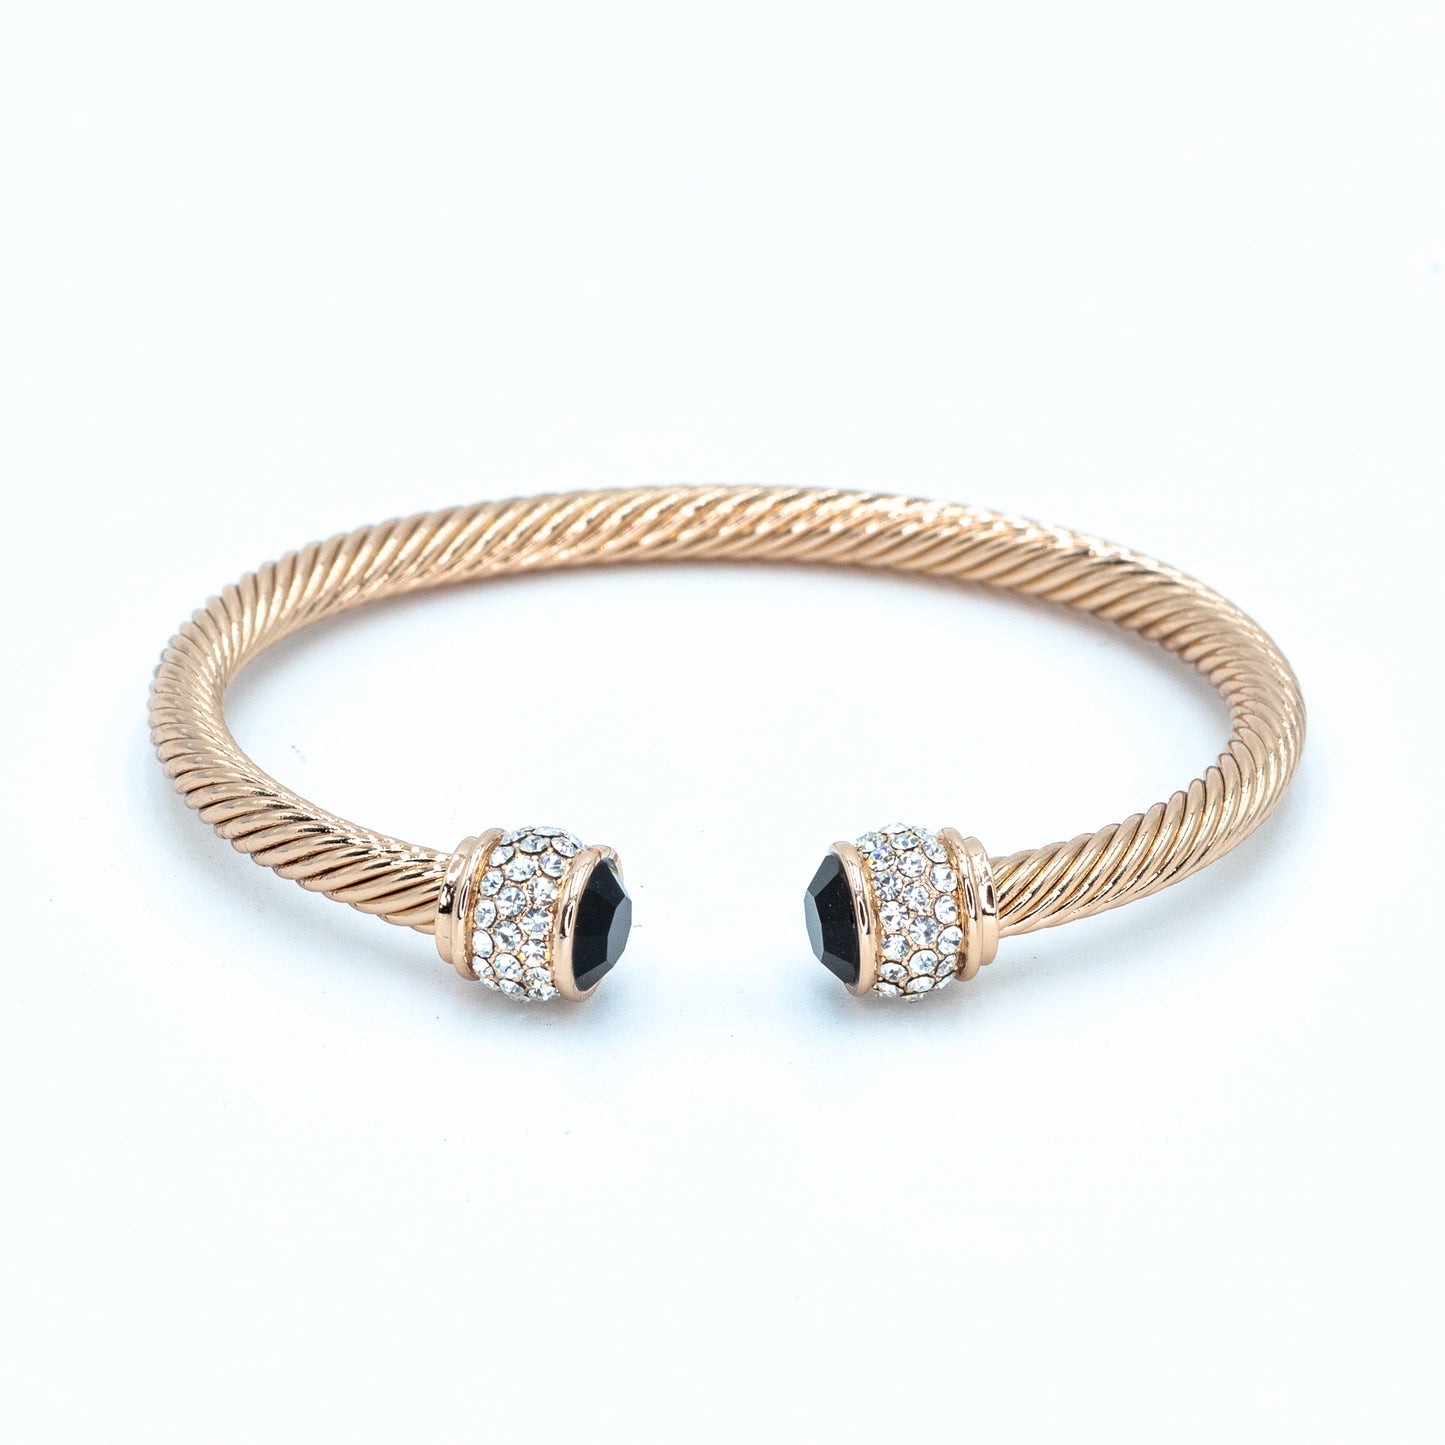 Rosegold plated bangle w/ CZ stones and jet black stone Default Title